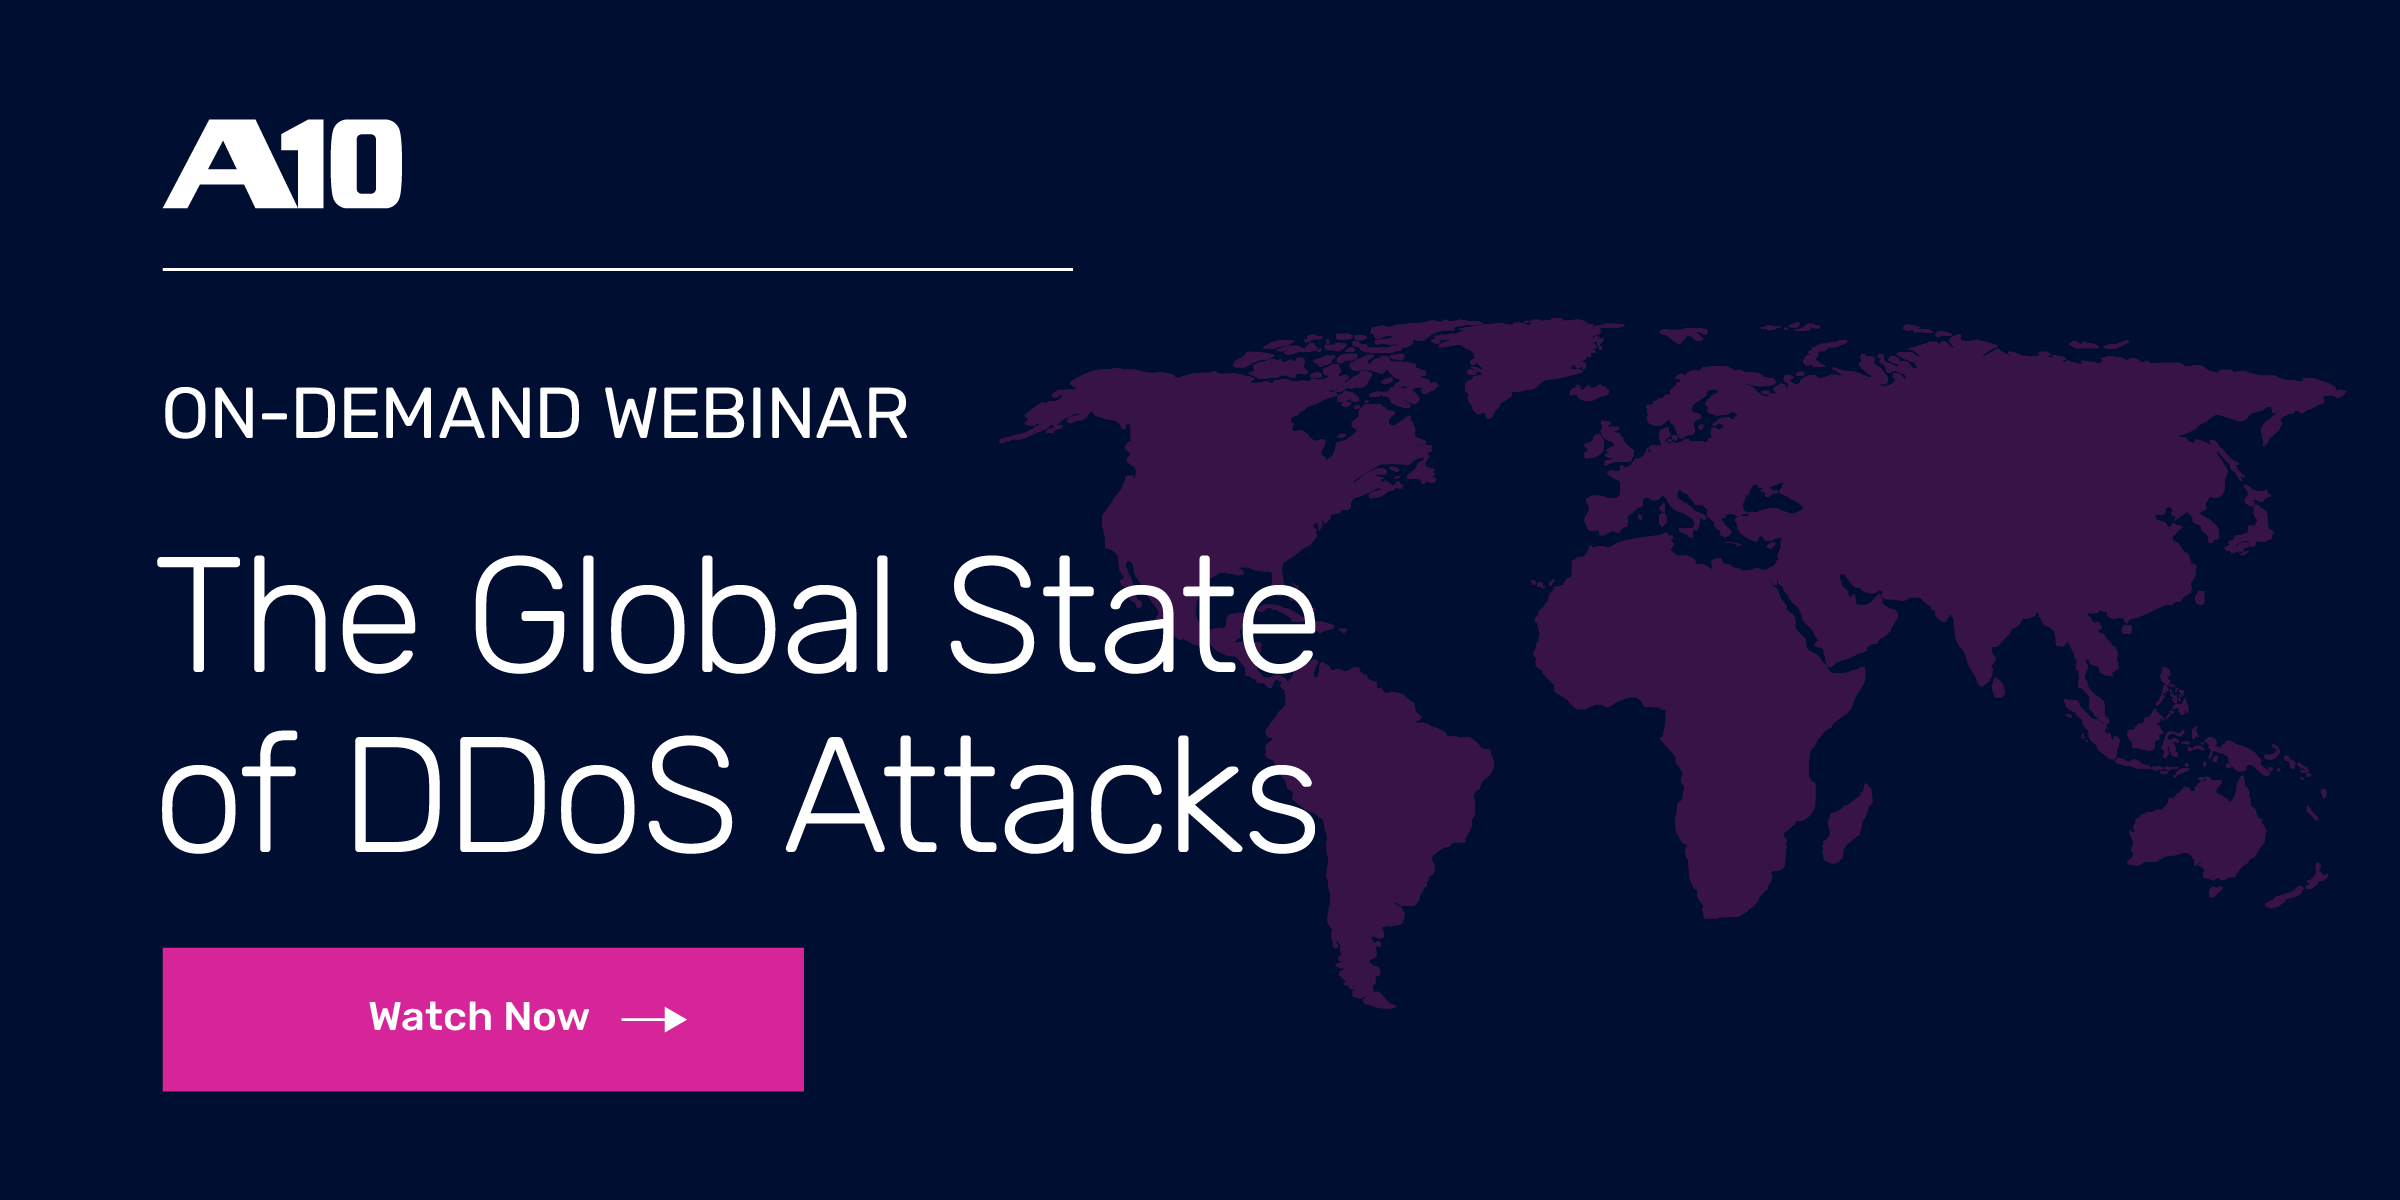 The Global State of DDoS Attacks